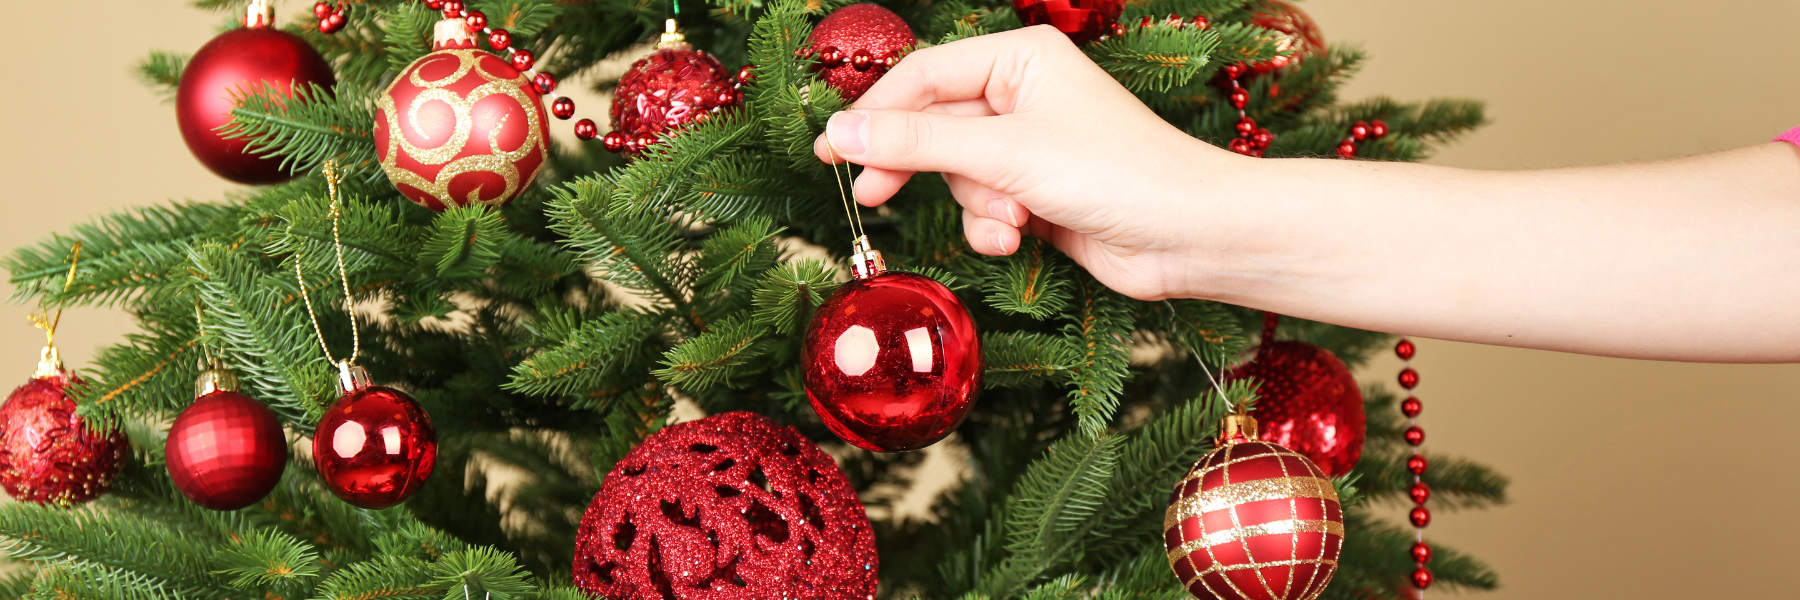 Does your christmas tree affect the indoor air?